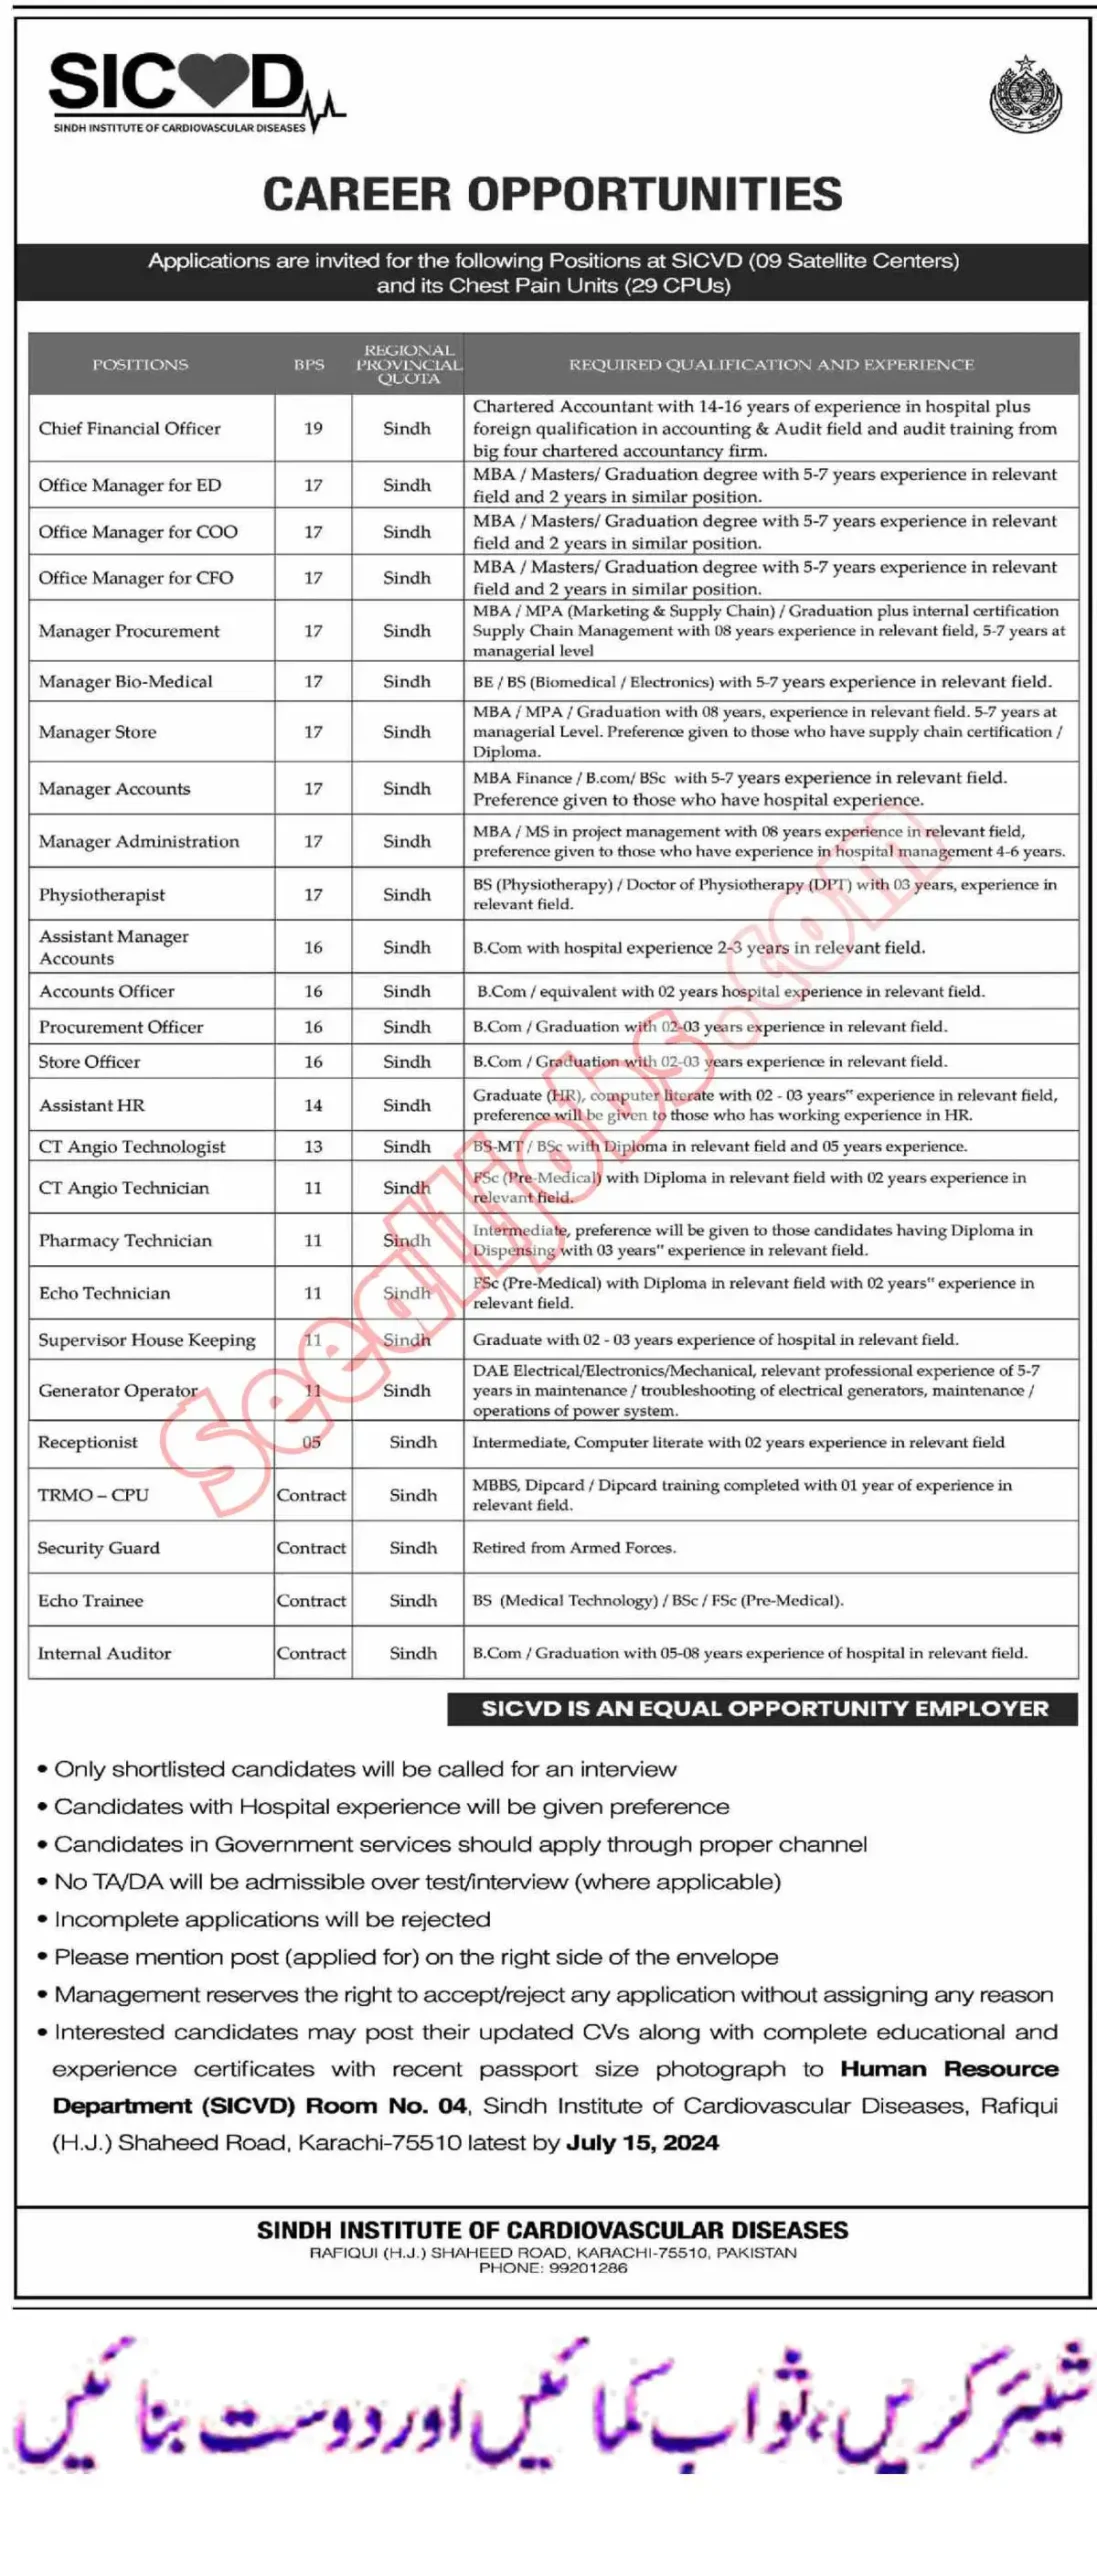 Latest Sindh Institute of Cardiovascular Diseases SICVD Jobs